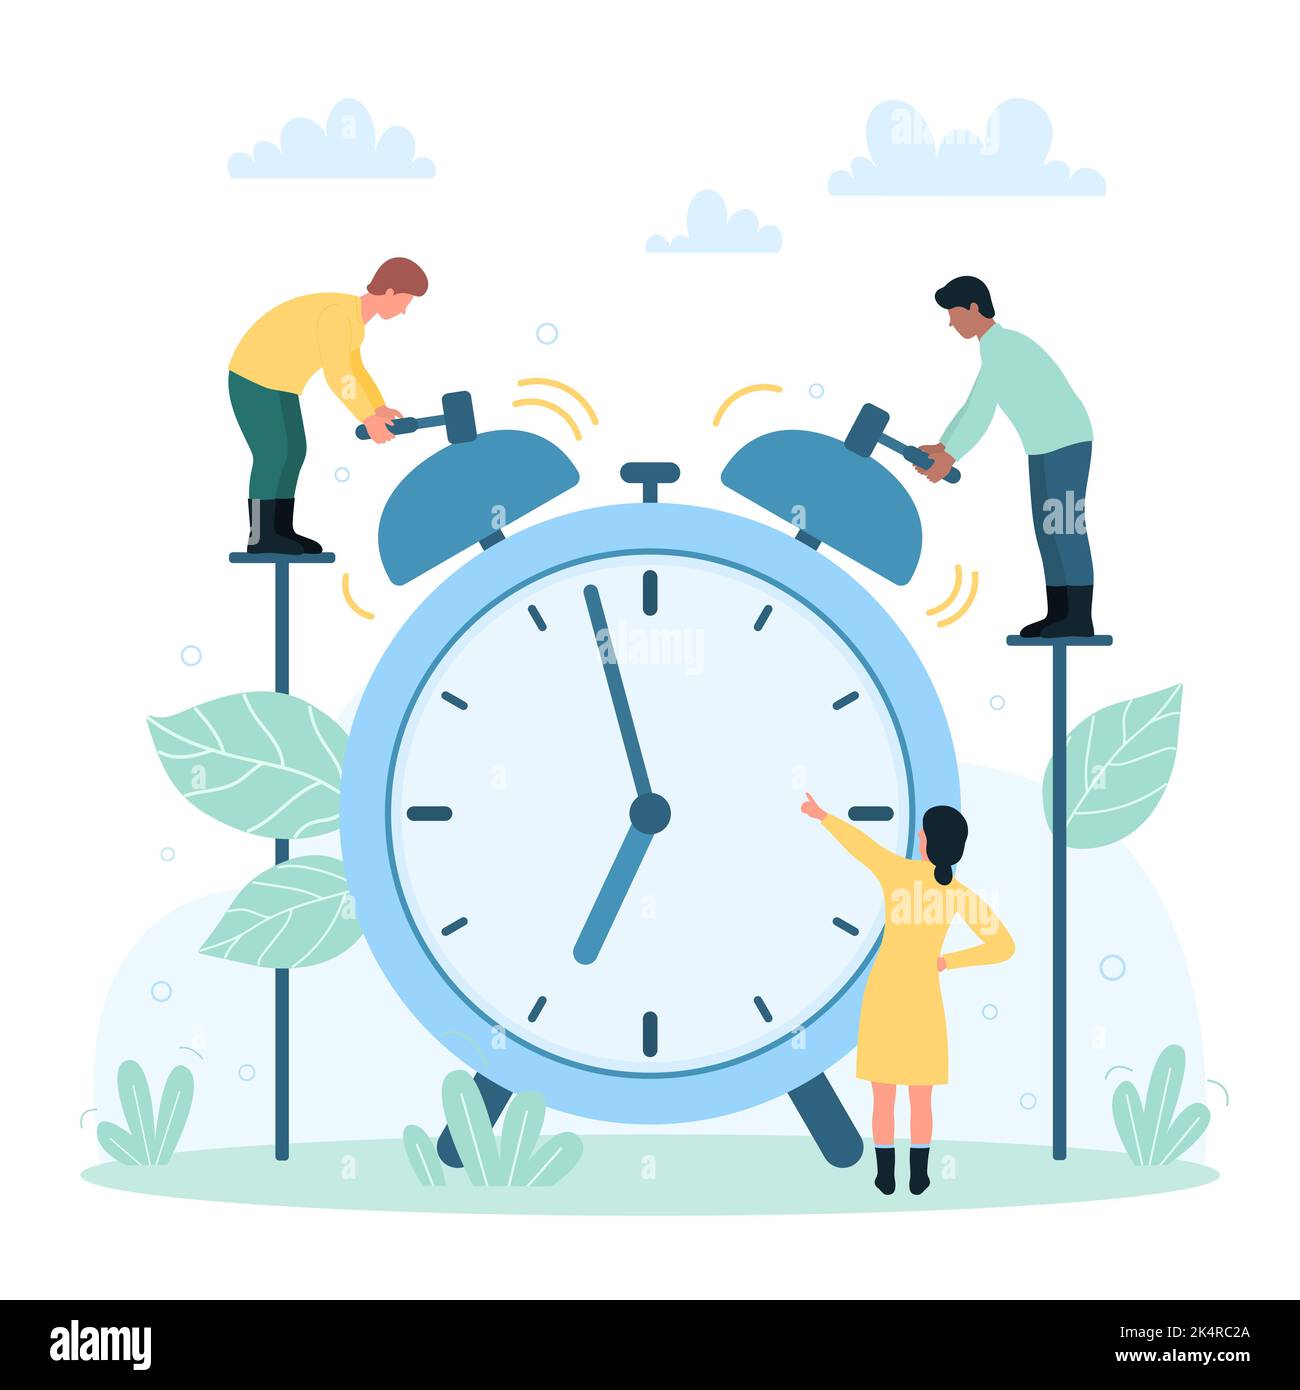 Time management, efficiency of daily tasks and punctuality vector illustration. Cartoon tiny people hitting hammers to make alarm clock ring, reminder for employees. Deadline, countdown concept Stock Vector